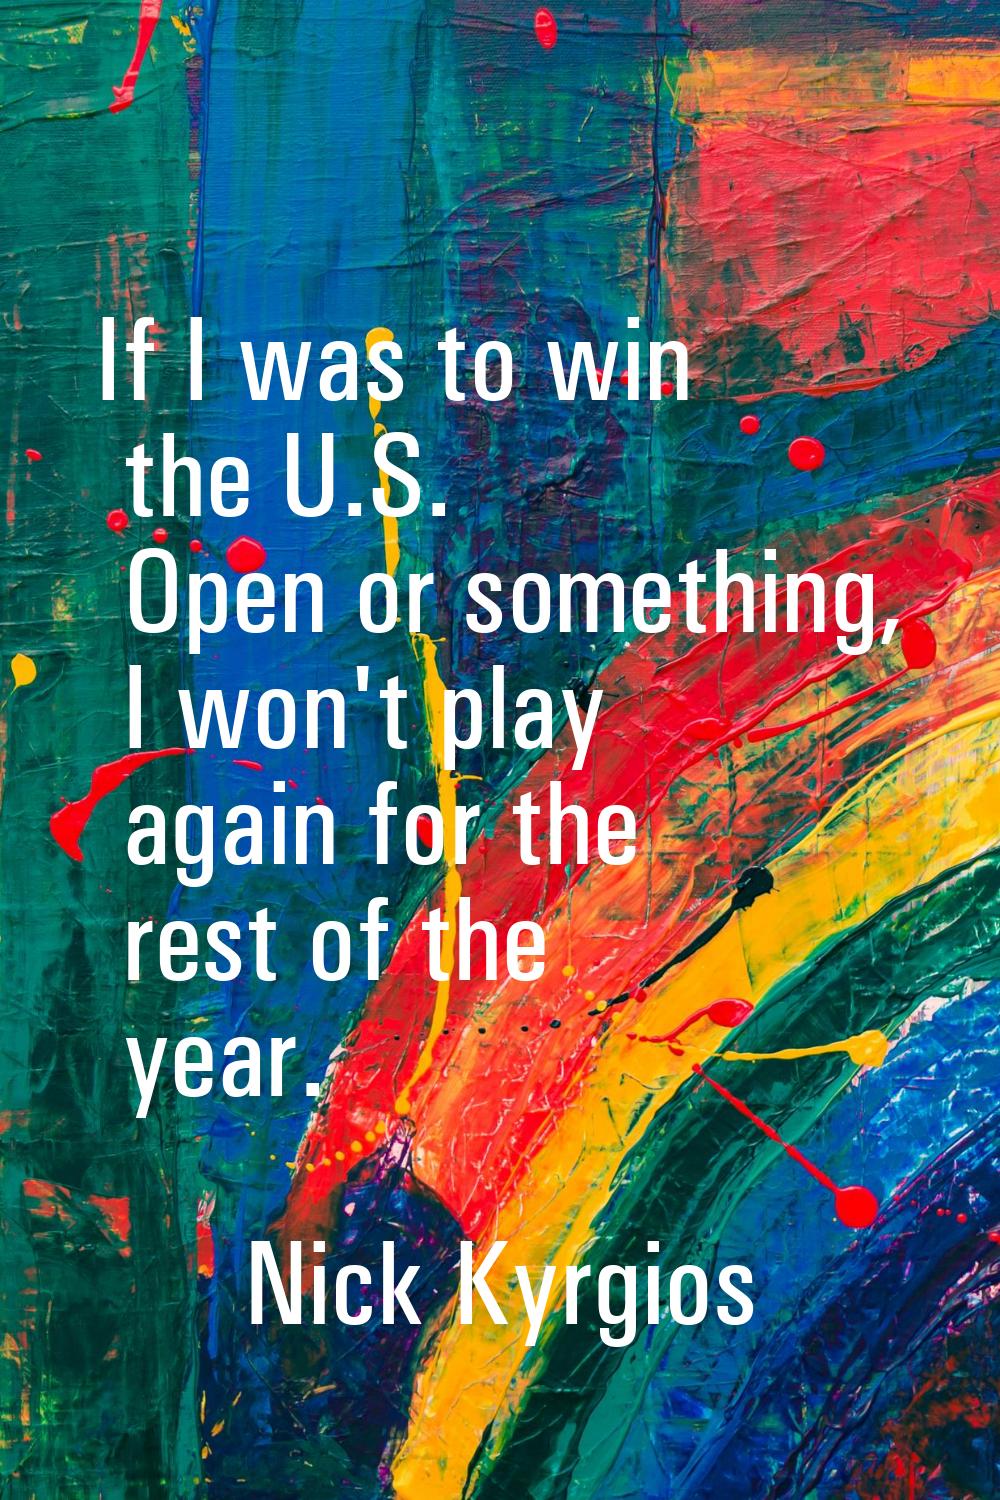 If I was to win the U.S. Open or something, I won't play again for the rest of the year.